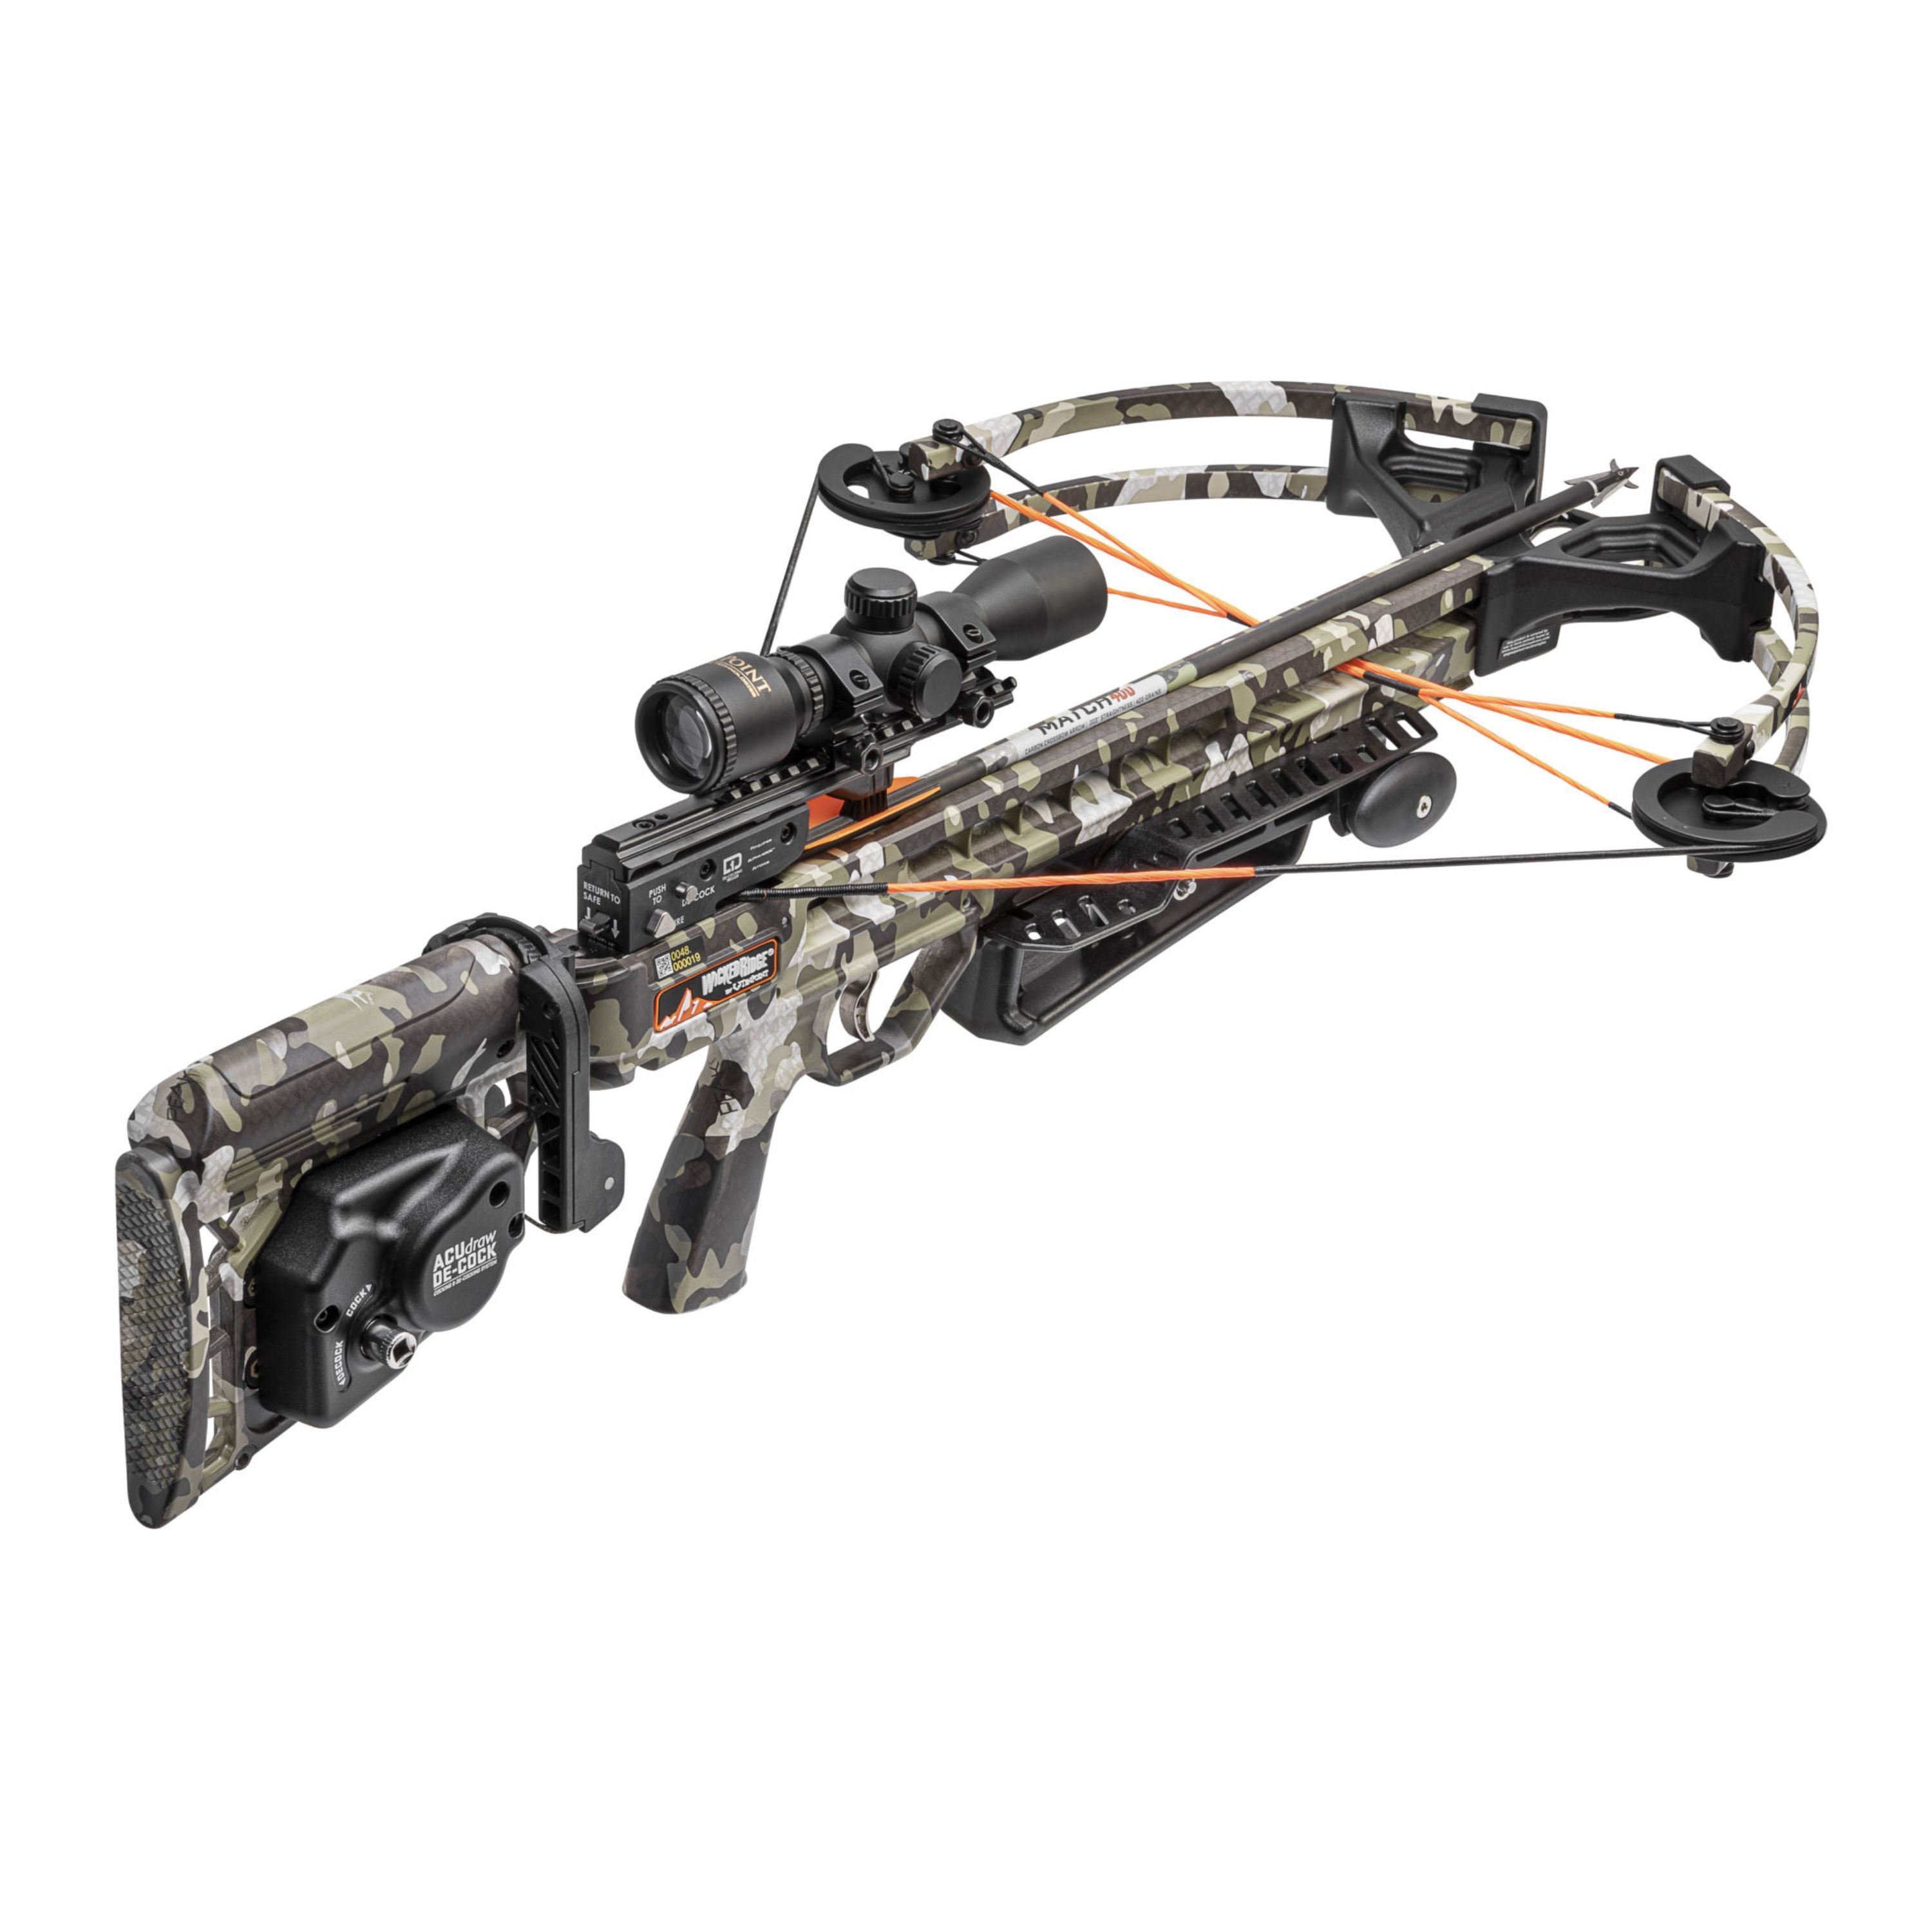 "Raider 400" De-cock crossbow with acudraw and scope